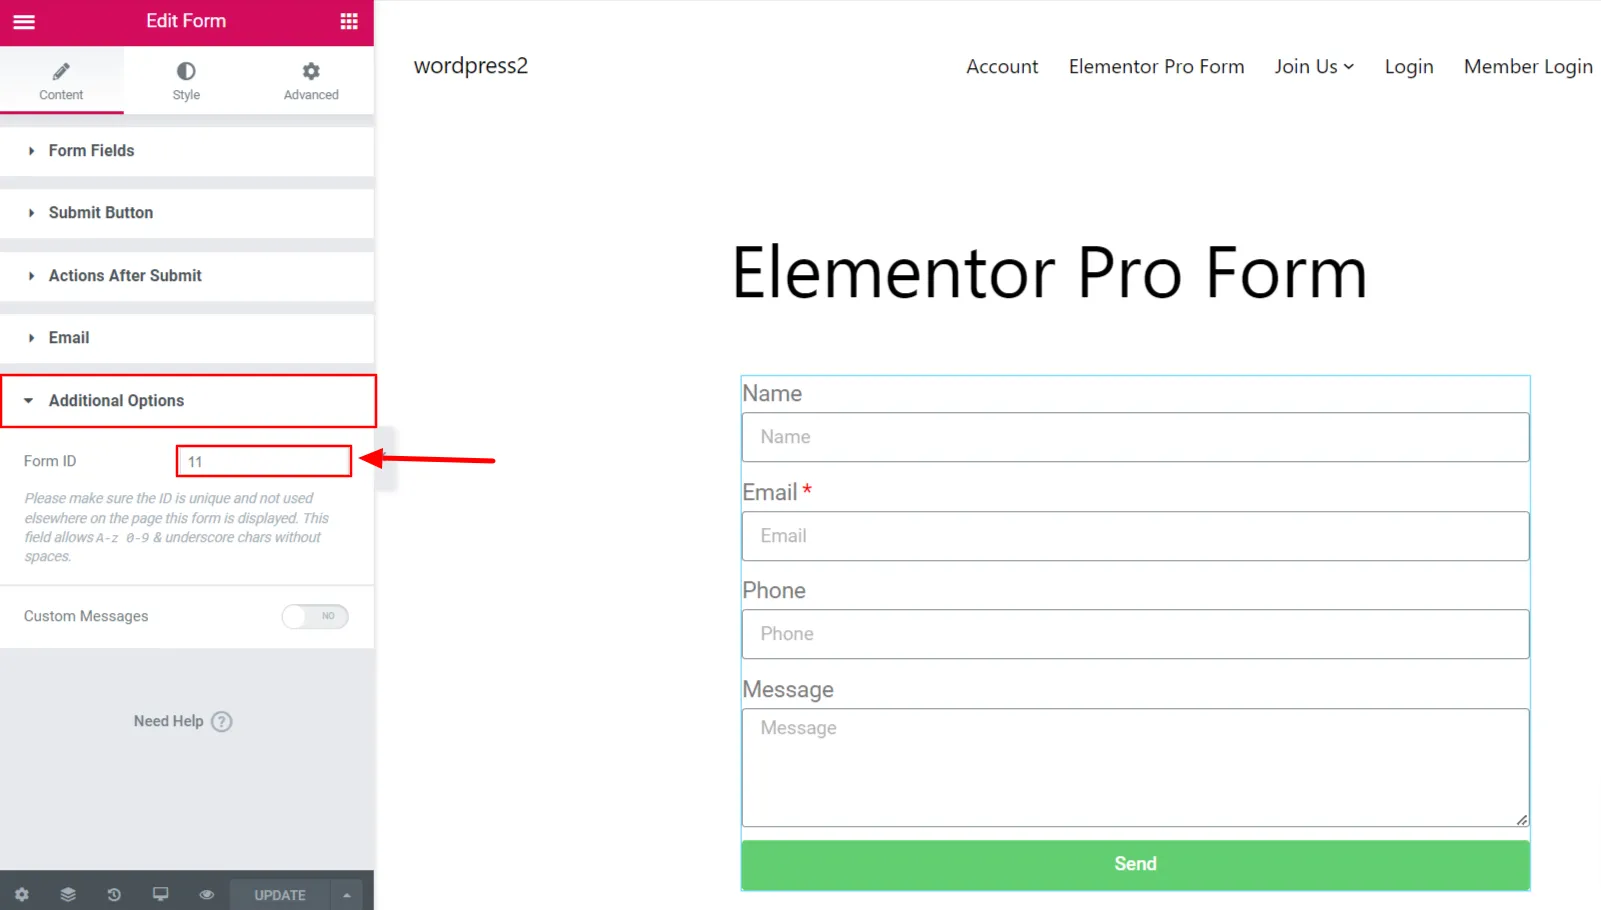 Elementor Pro Form - note form ID